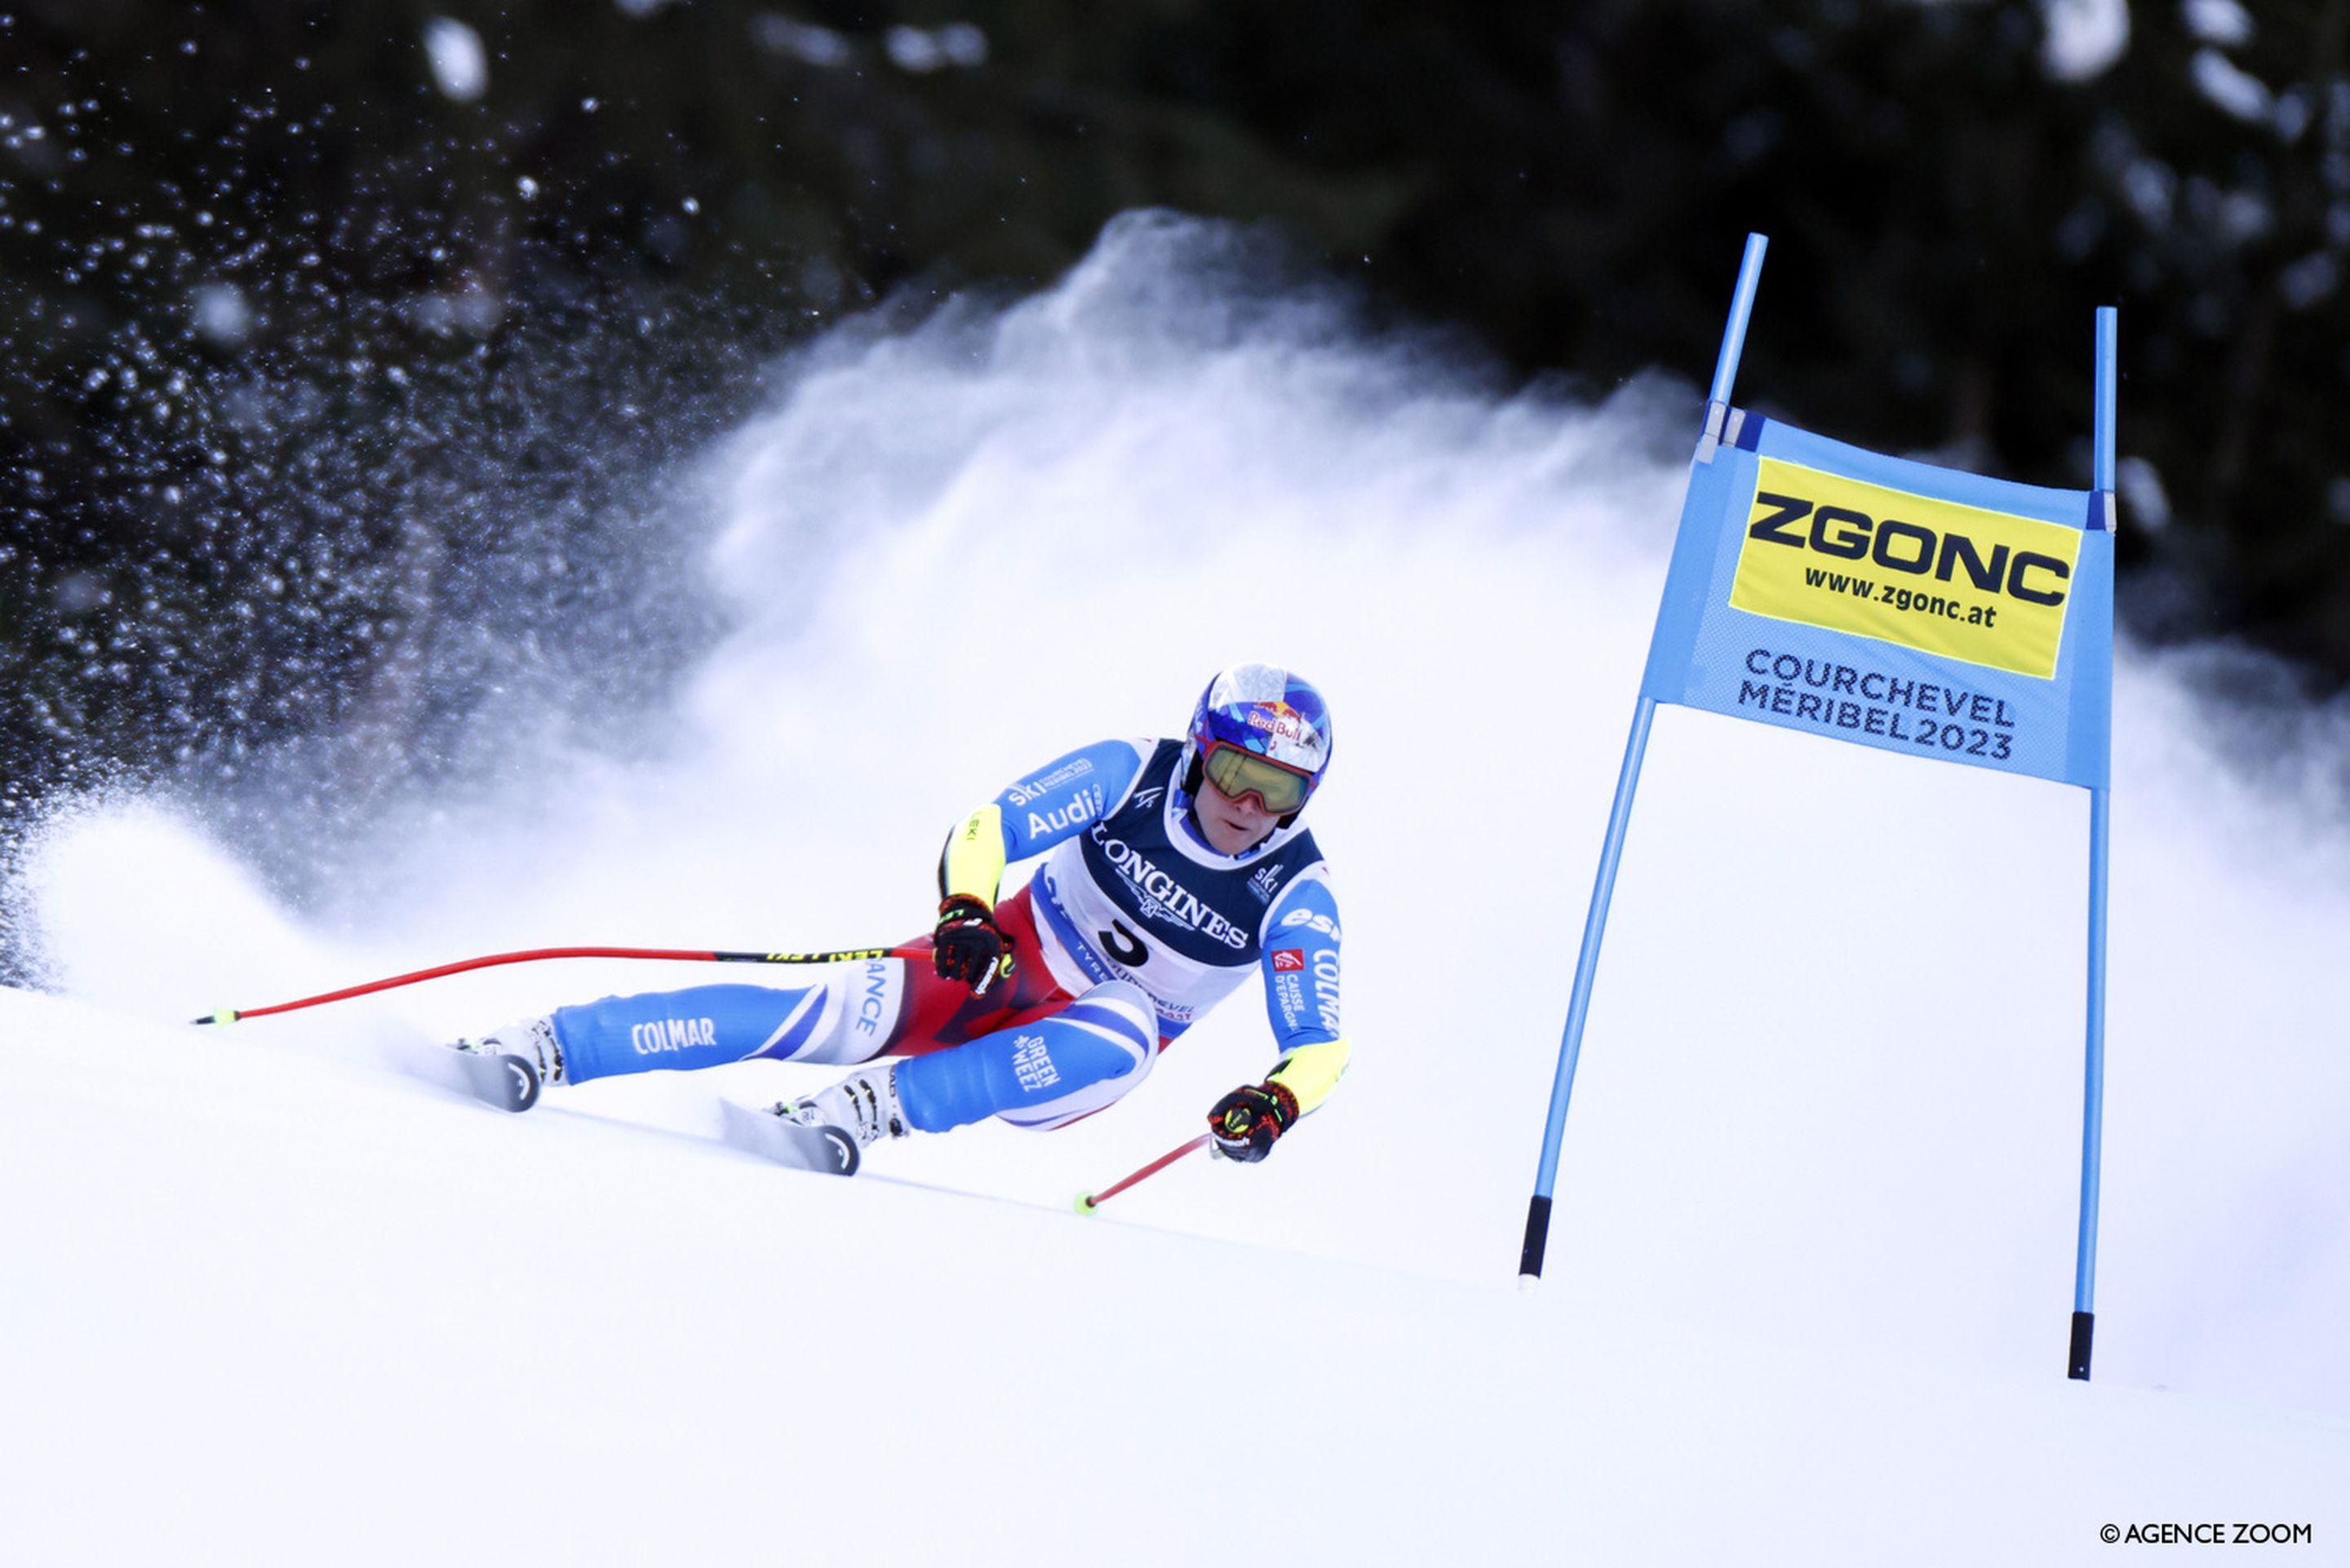 Pinturault attacking the super-G course in the first leg of Tuesday's race (Agence Zoom)